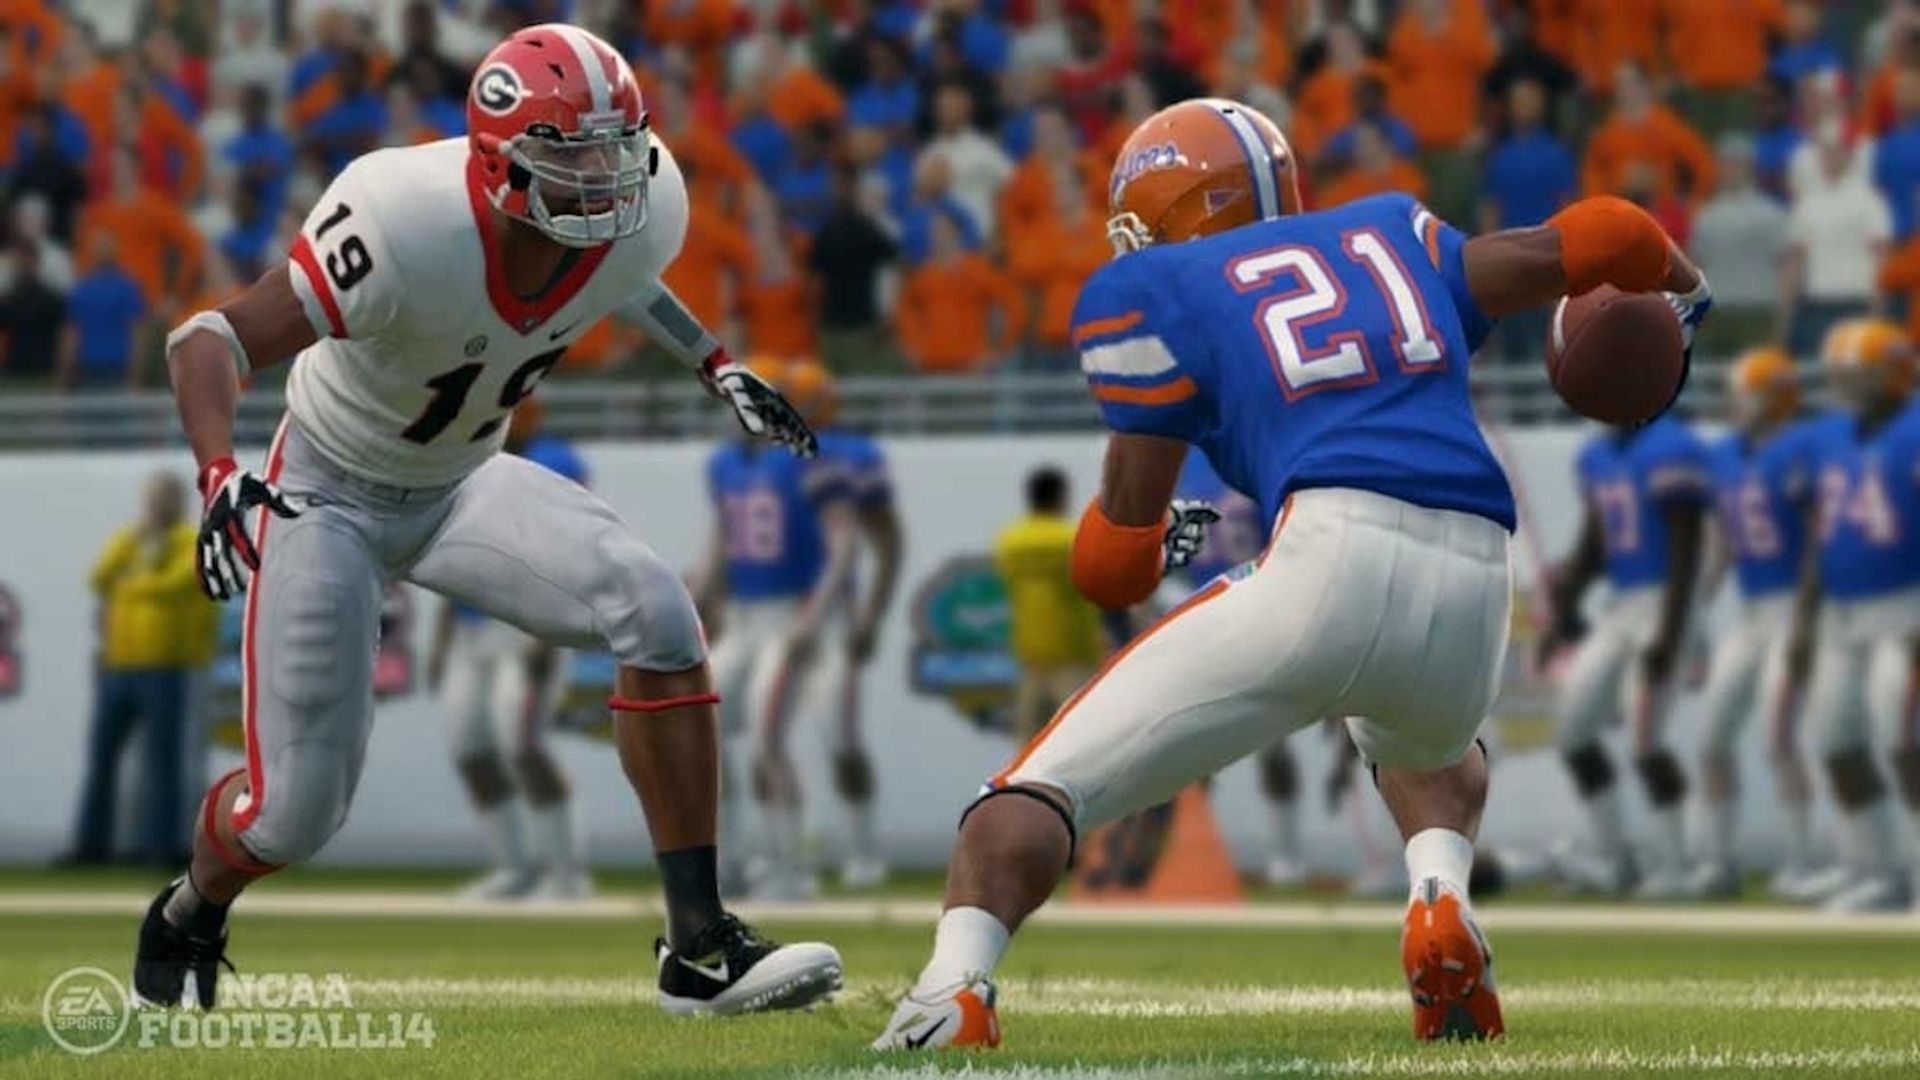 Video game screenshot of two college football players facing off